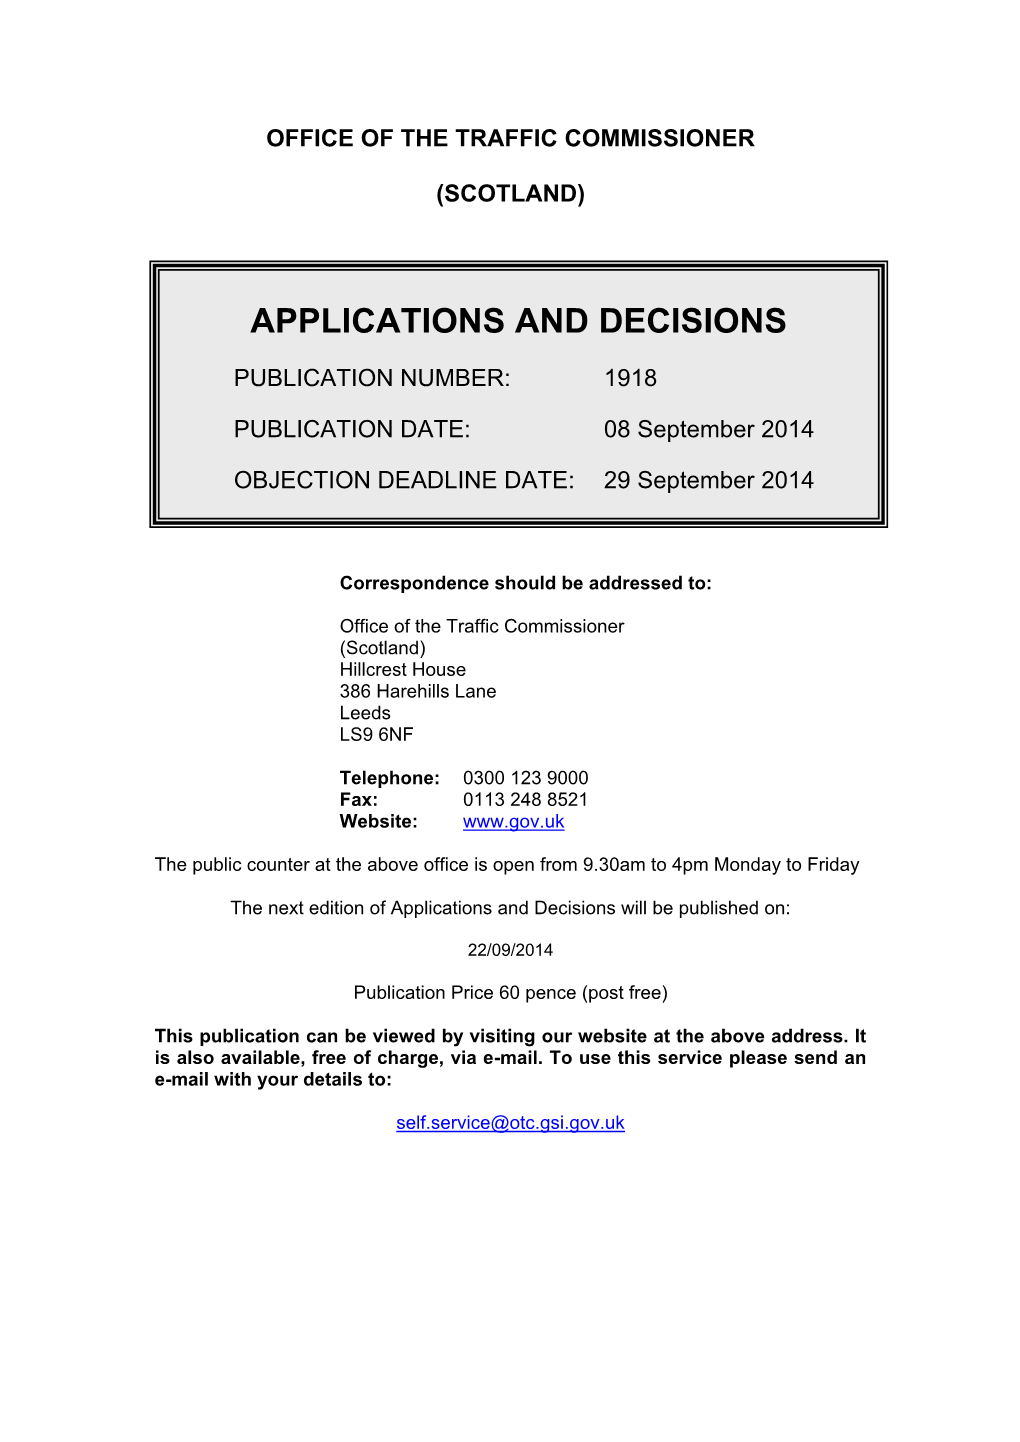 Applications and Decisions 8 September 2014